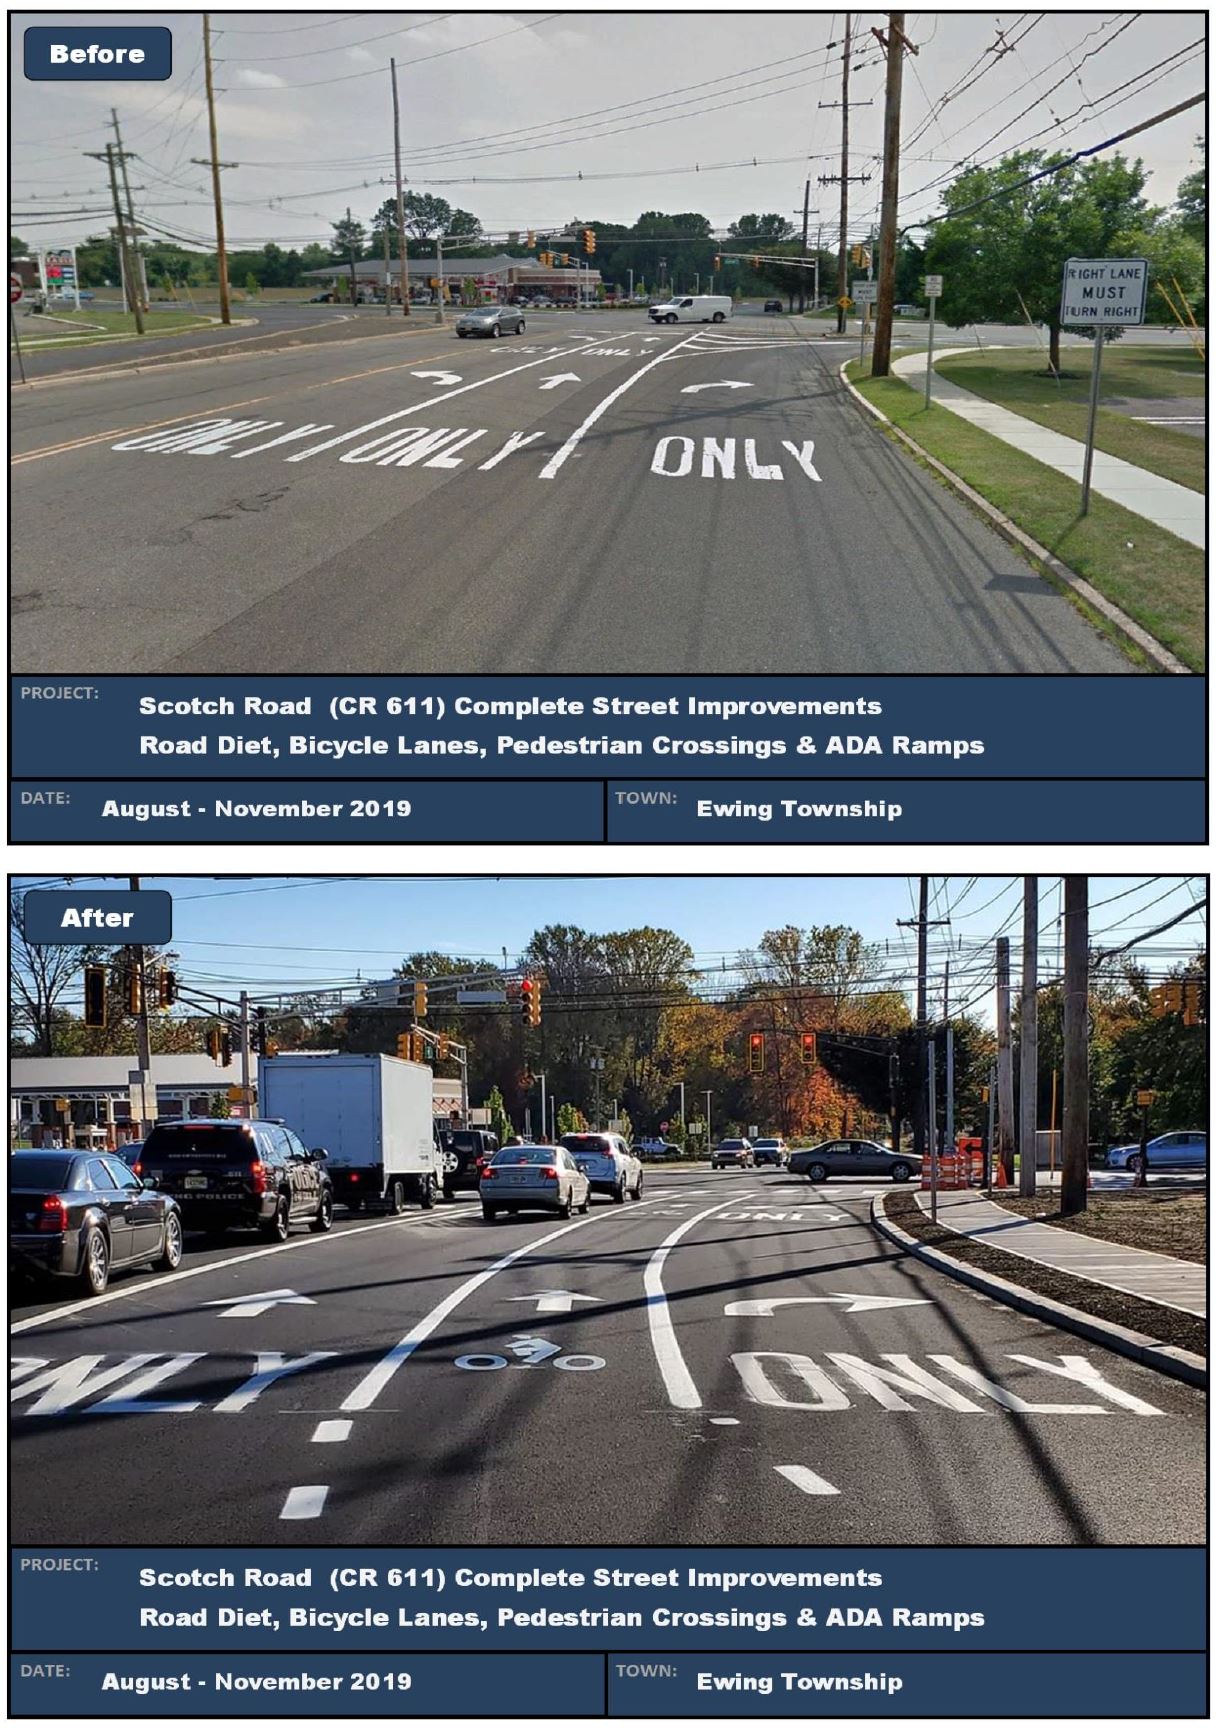 Restriping on Scotch Road resulted in addition of a bike lane between the through lane and the right turn lane